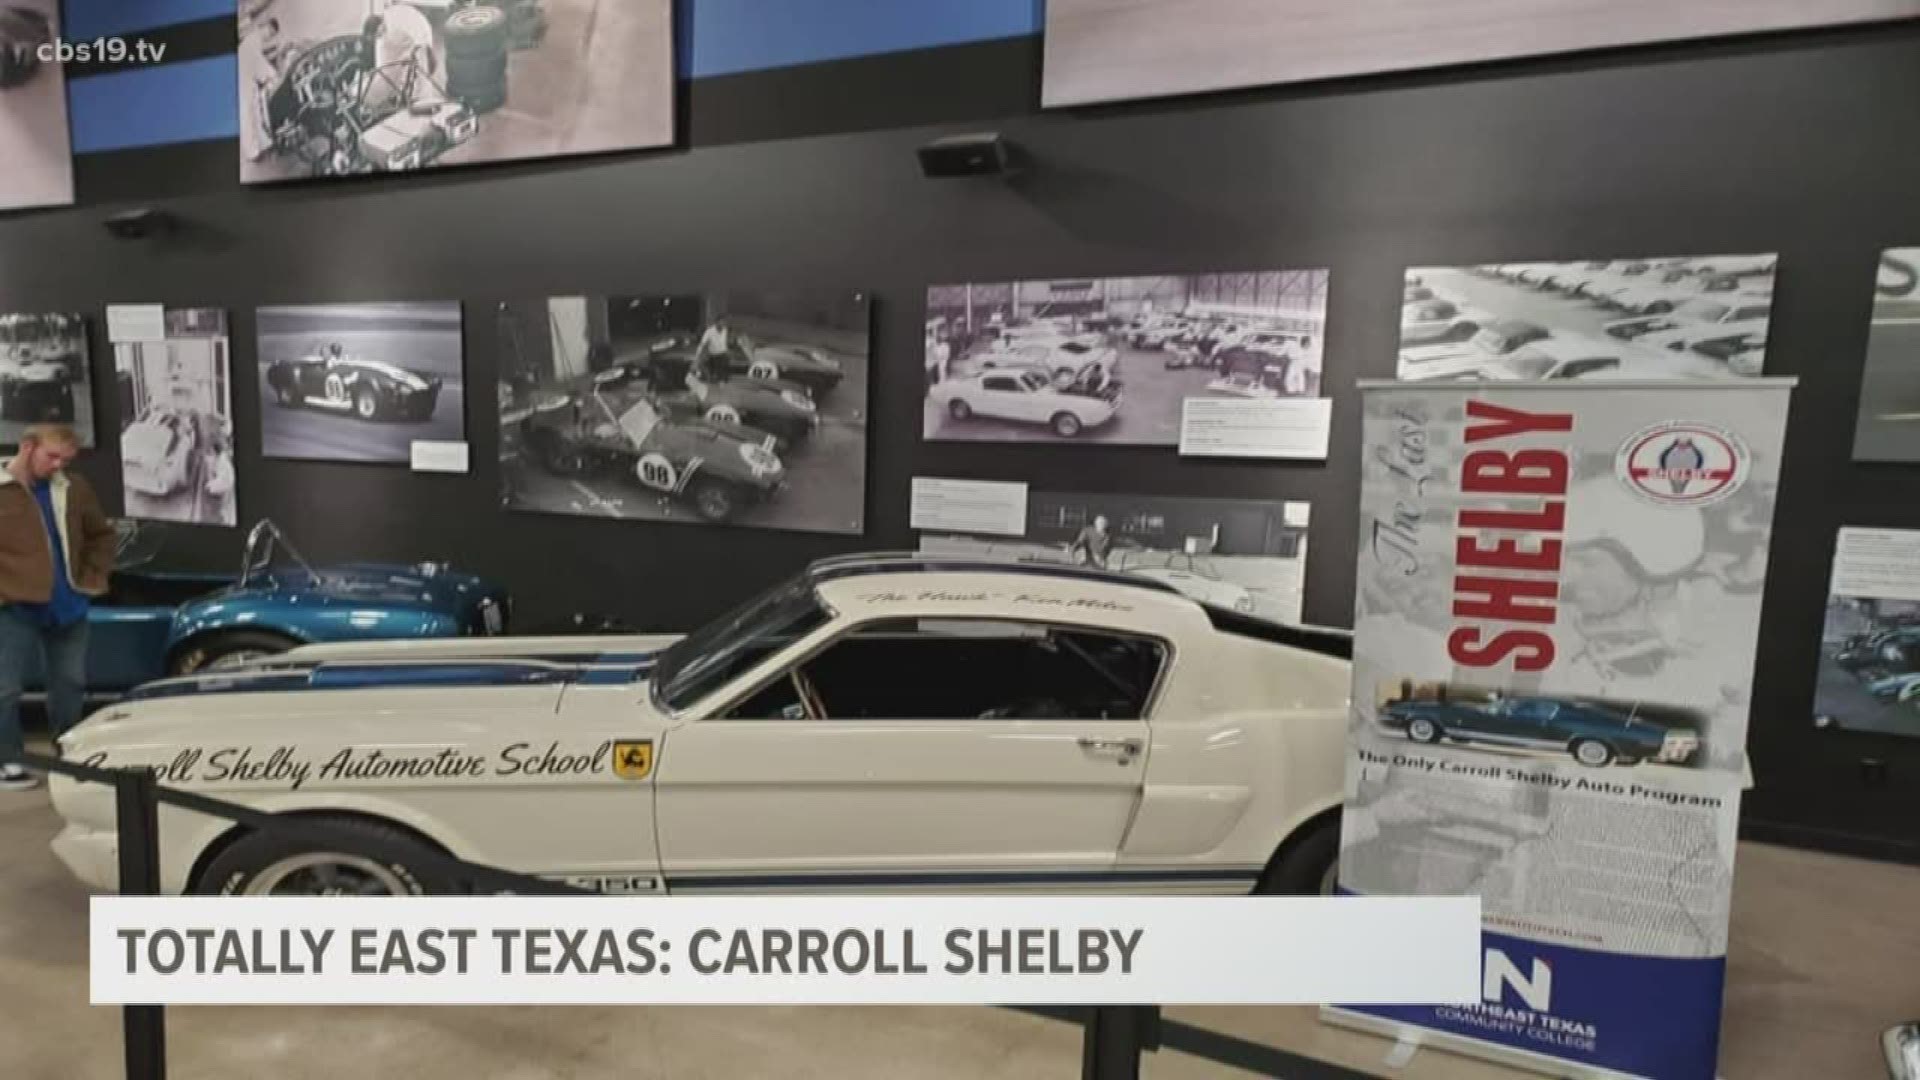 Carroll Shelby, racing and automotive legend, is portrayed in a new movie, Ford v. Ferrari. Students at his namesake school saw the premiere in Las Vegas.